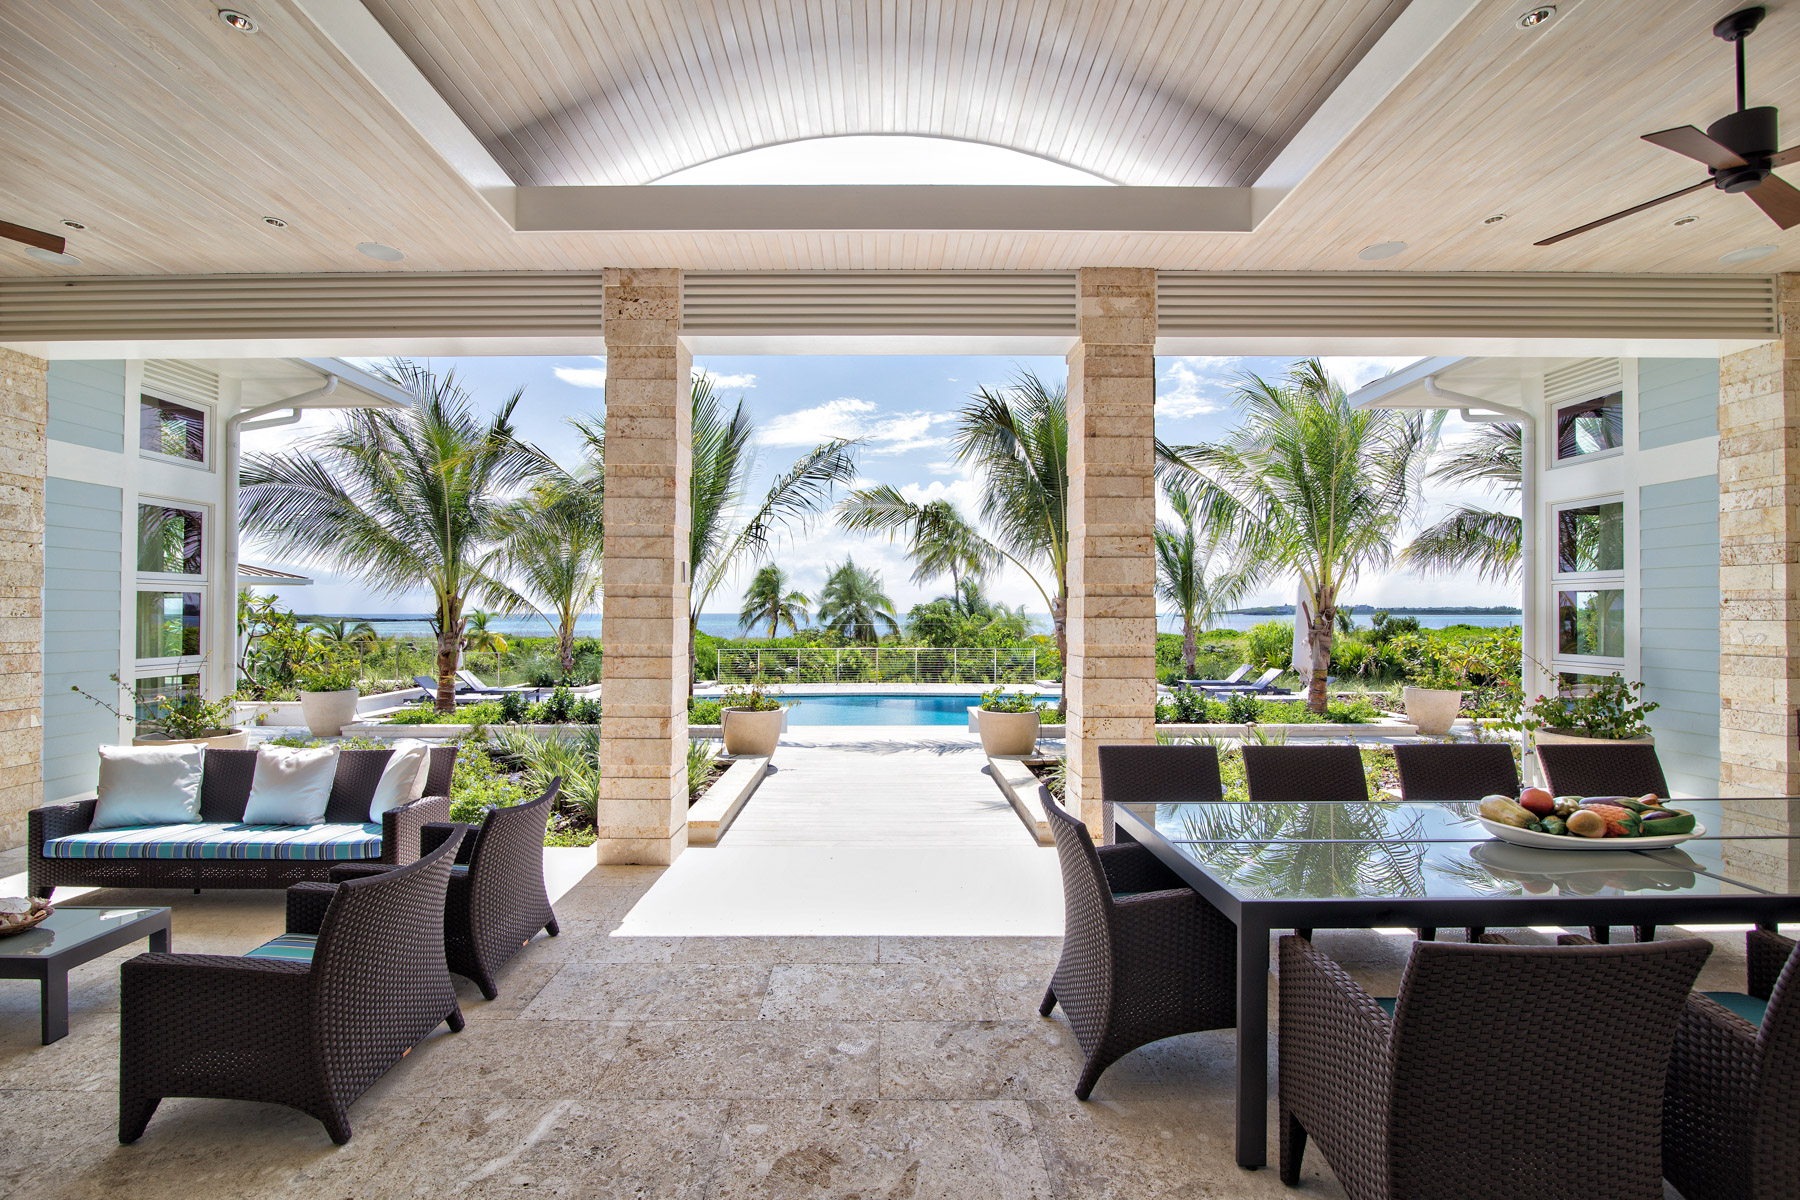 Living room and pool area of a house at The Abaco Club